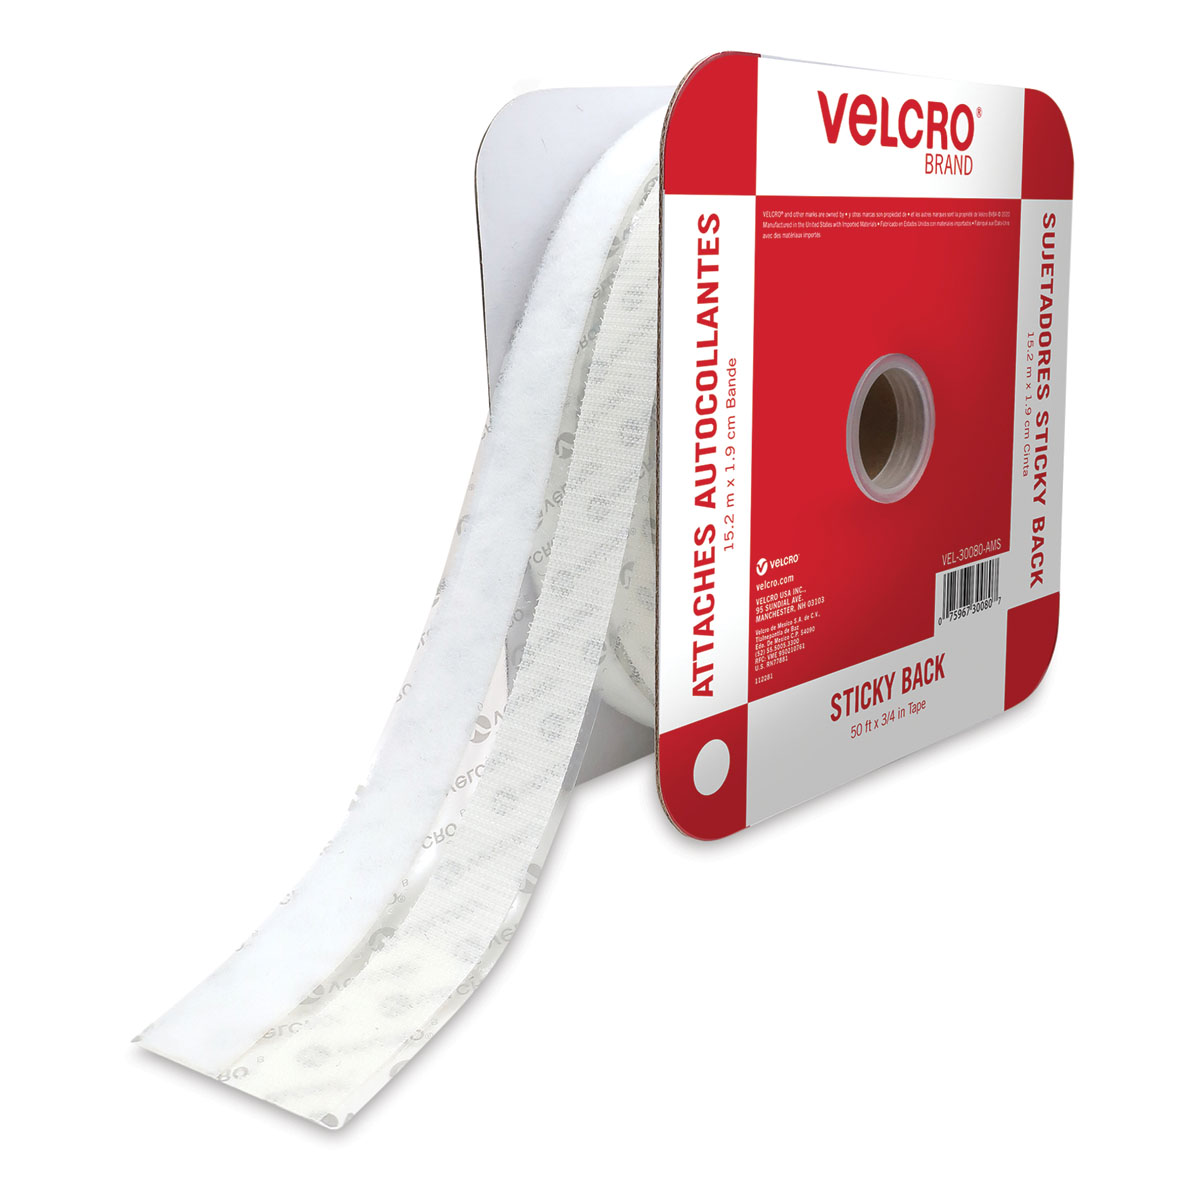 Velcro is too sticky for its own good - The Boston Globe